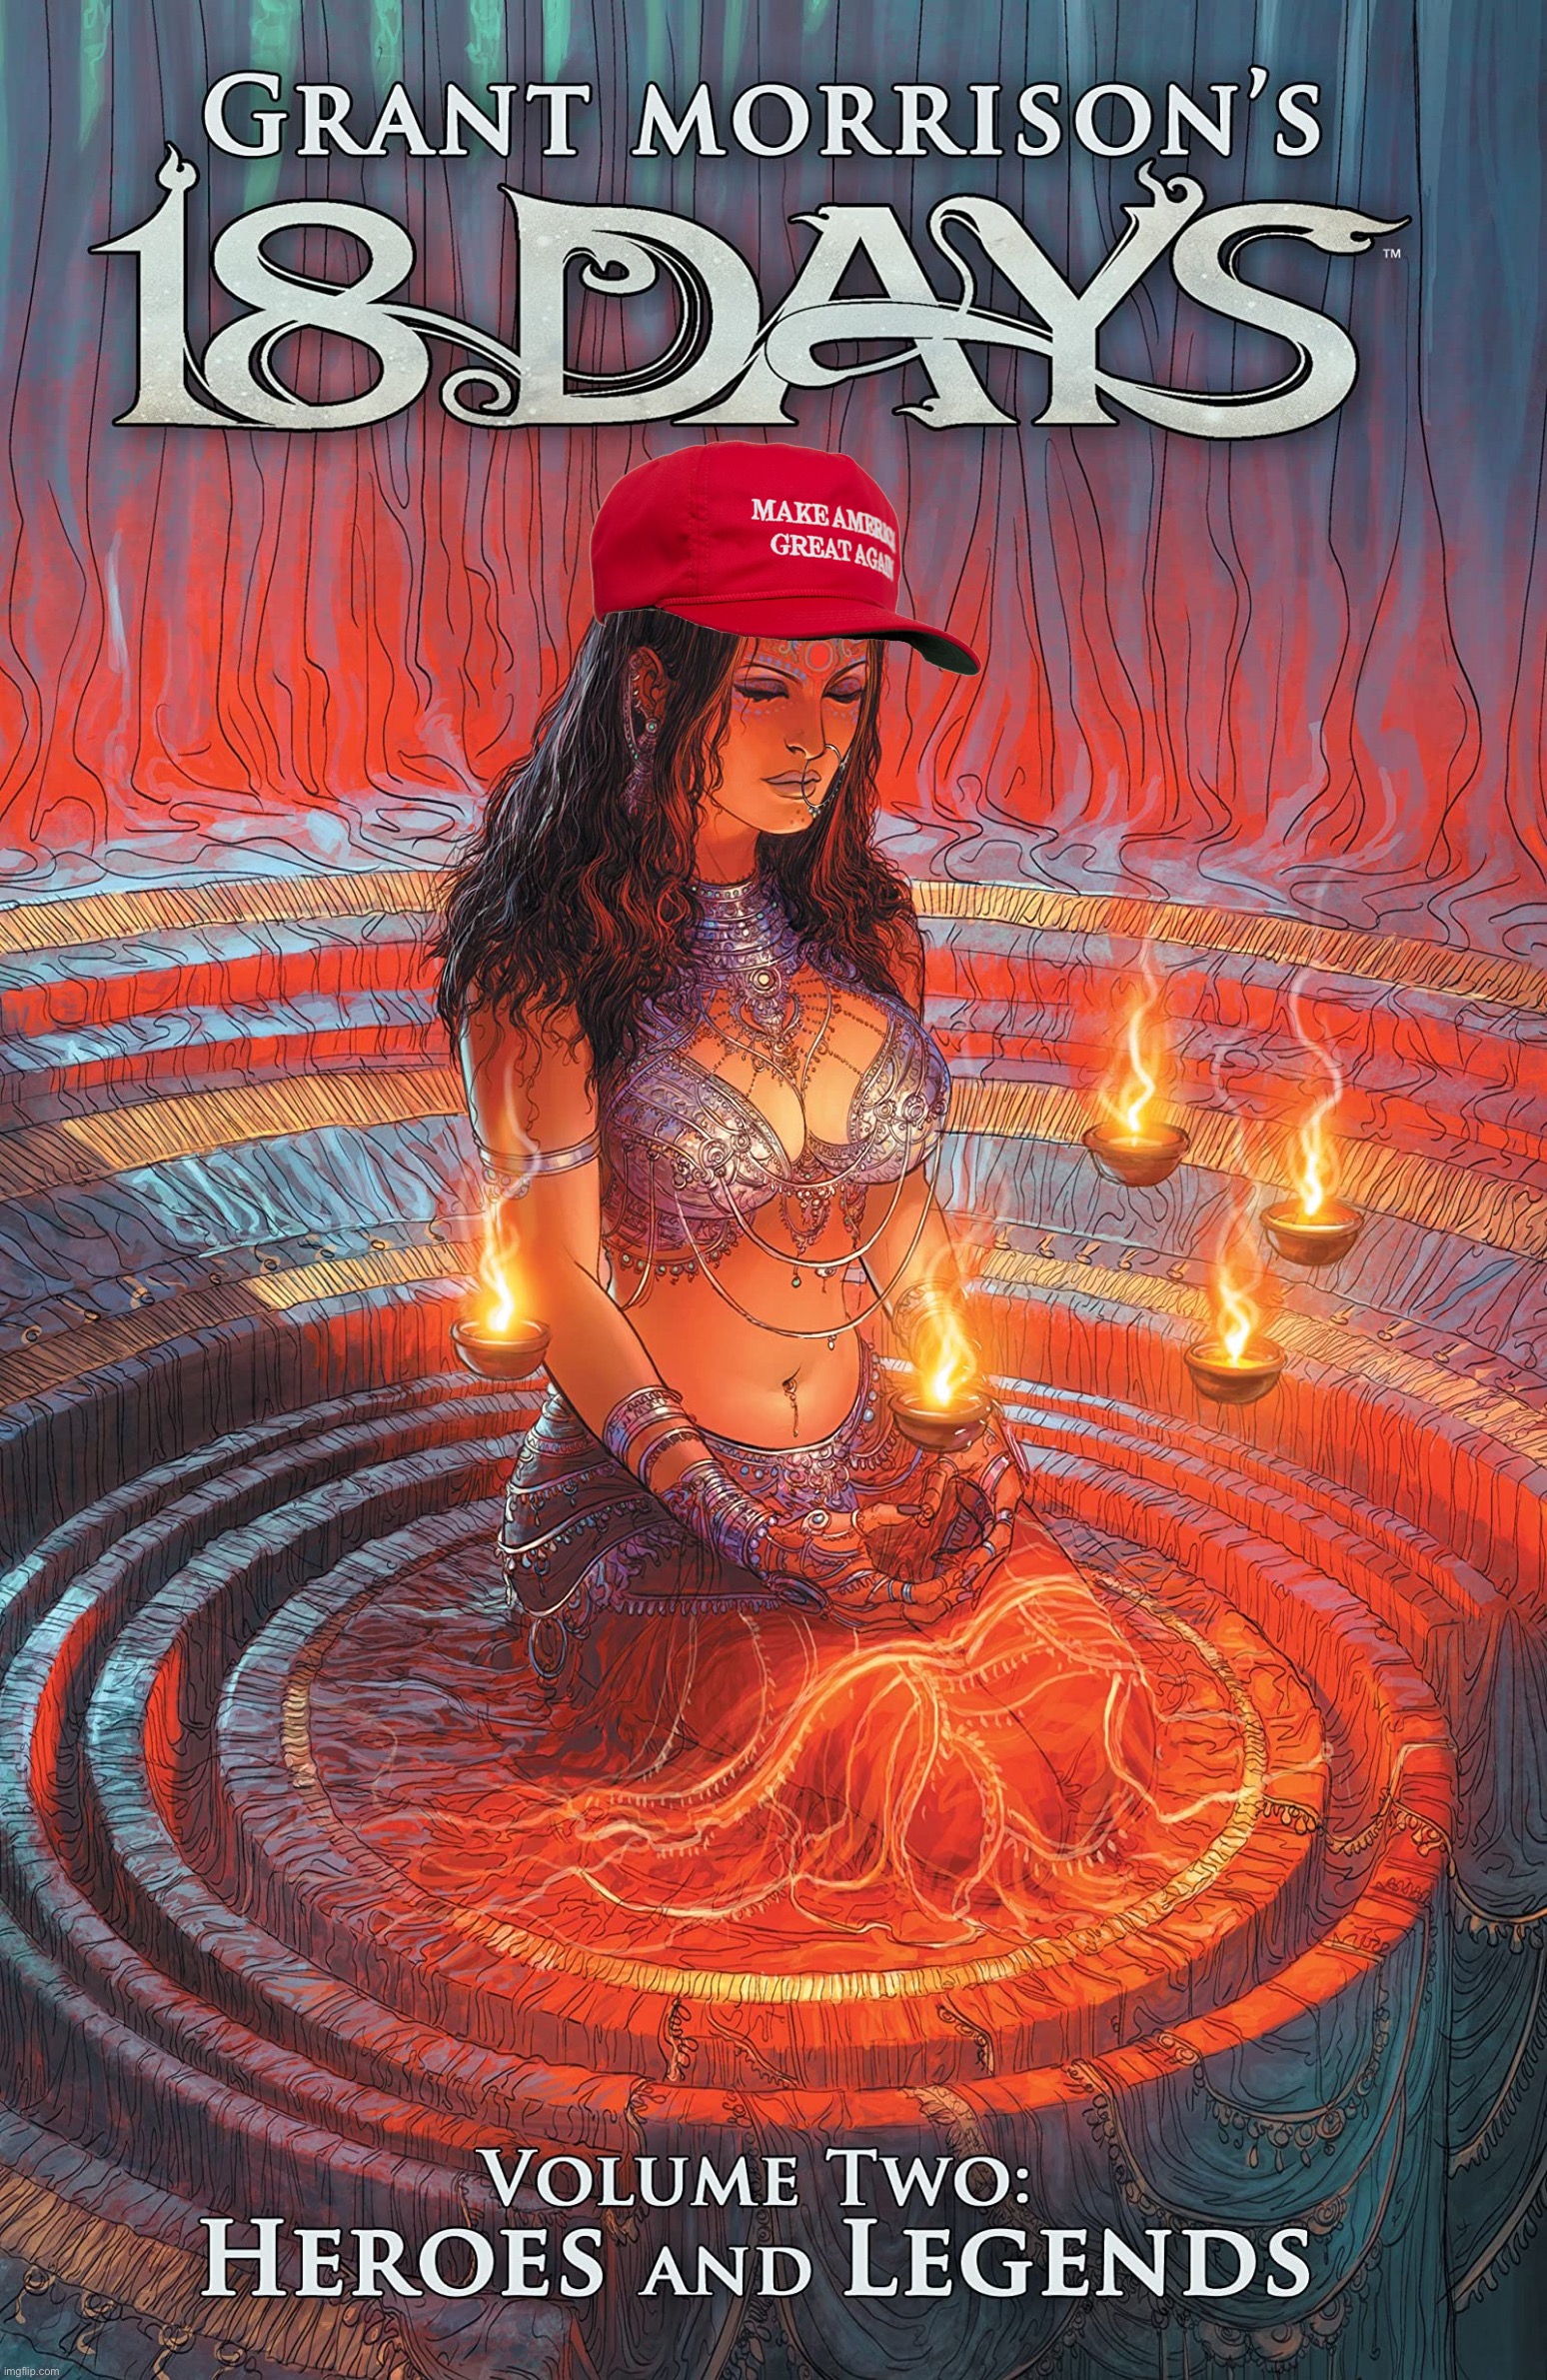 Summon the ancient one! SUMMON HIM!! | image tagged in grant morrison s 18 days,18 days,mike lindell,maga,trump inauguration,fantasy | made w/ Imgflip meme maker